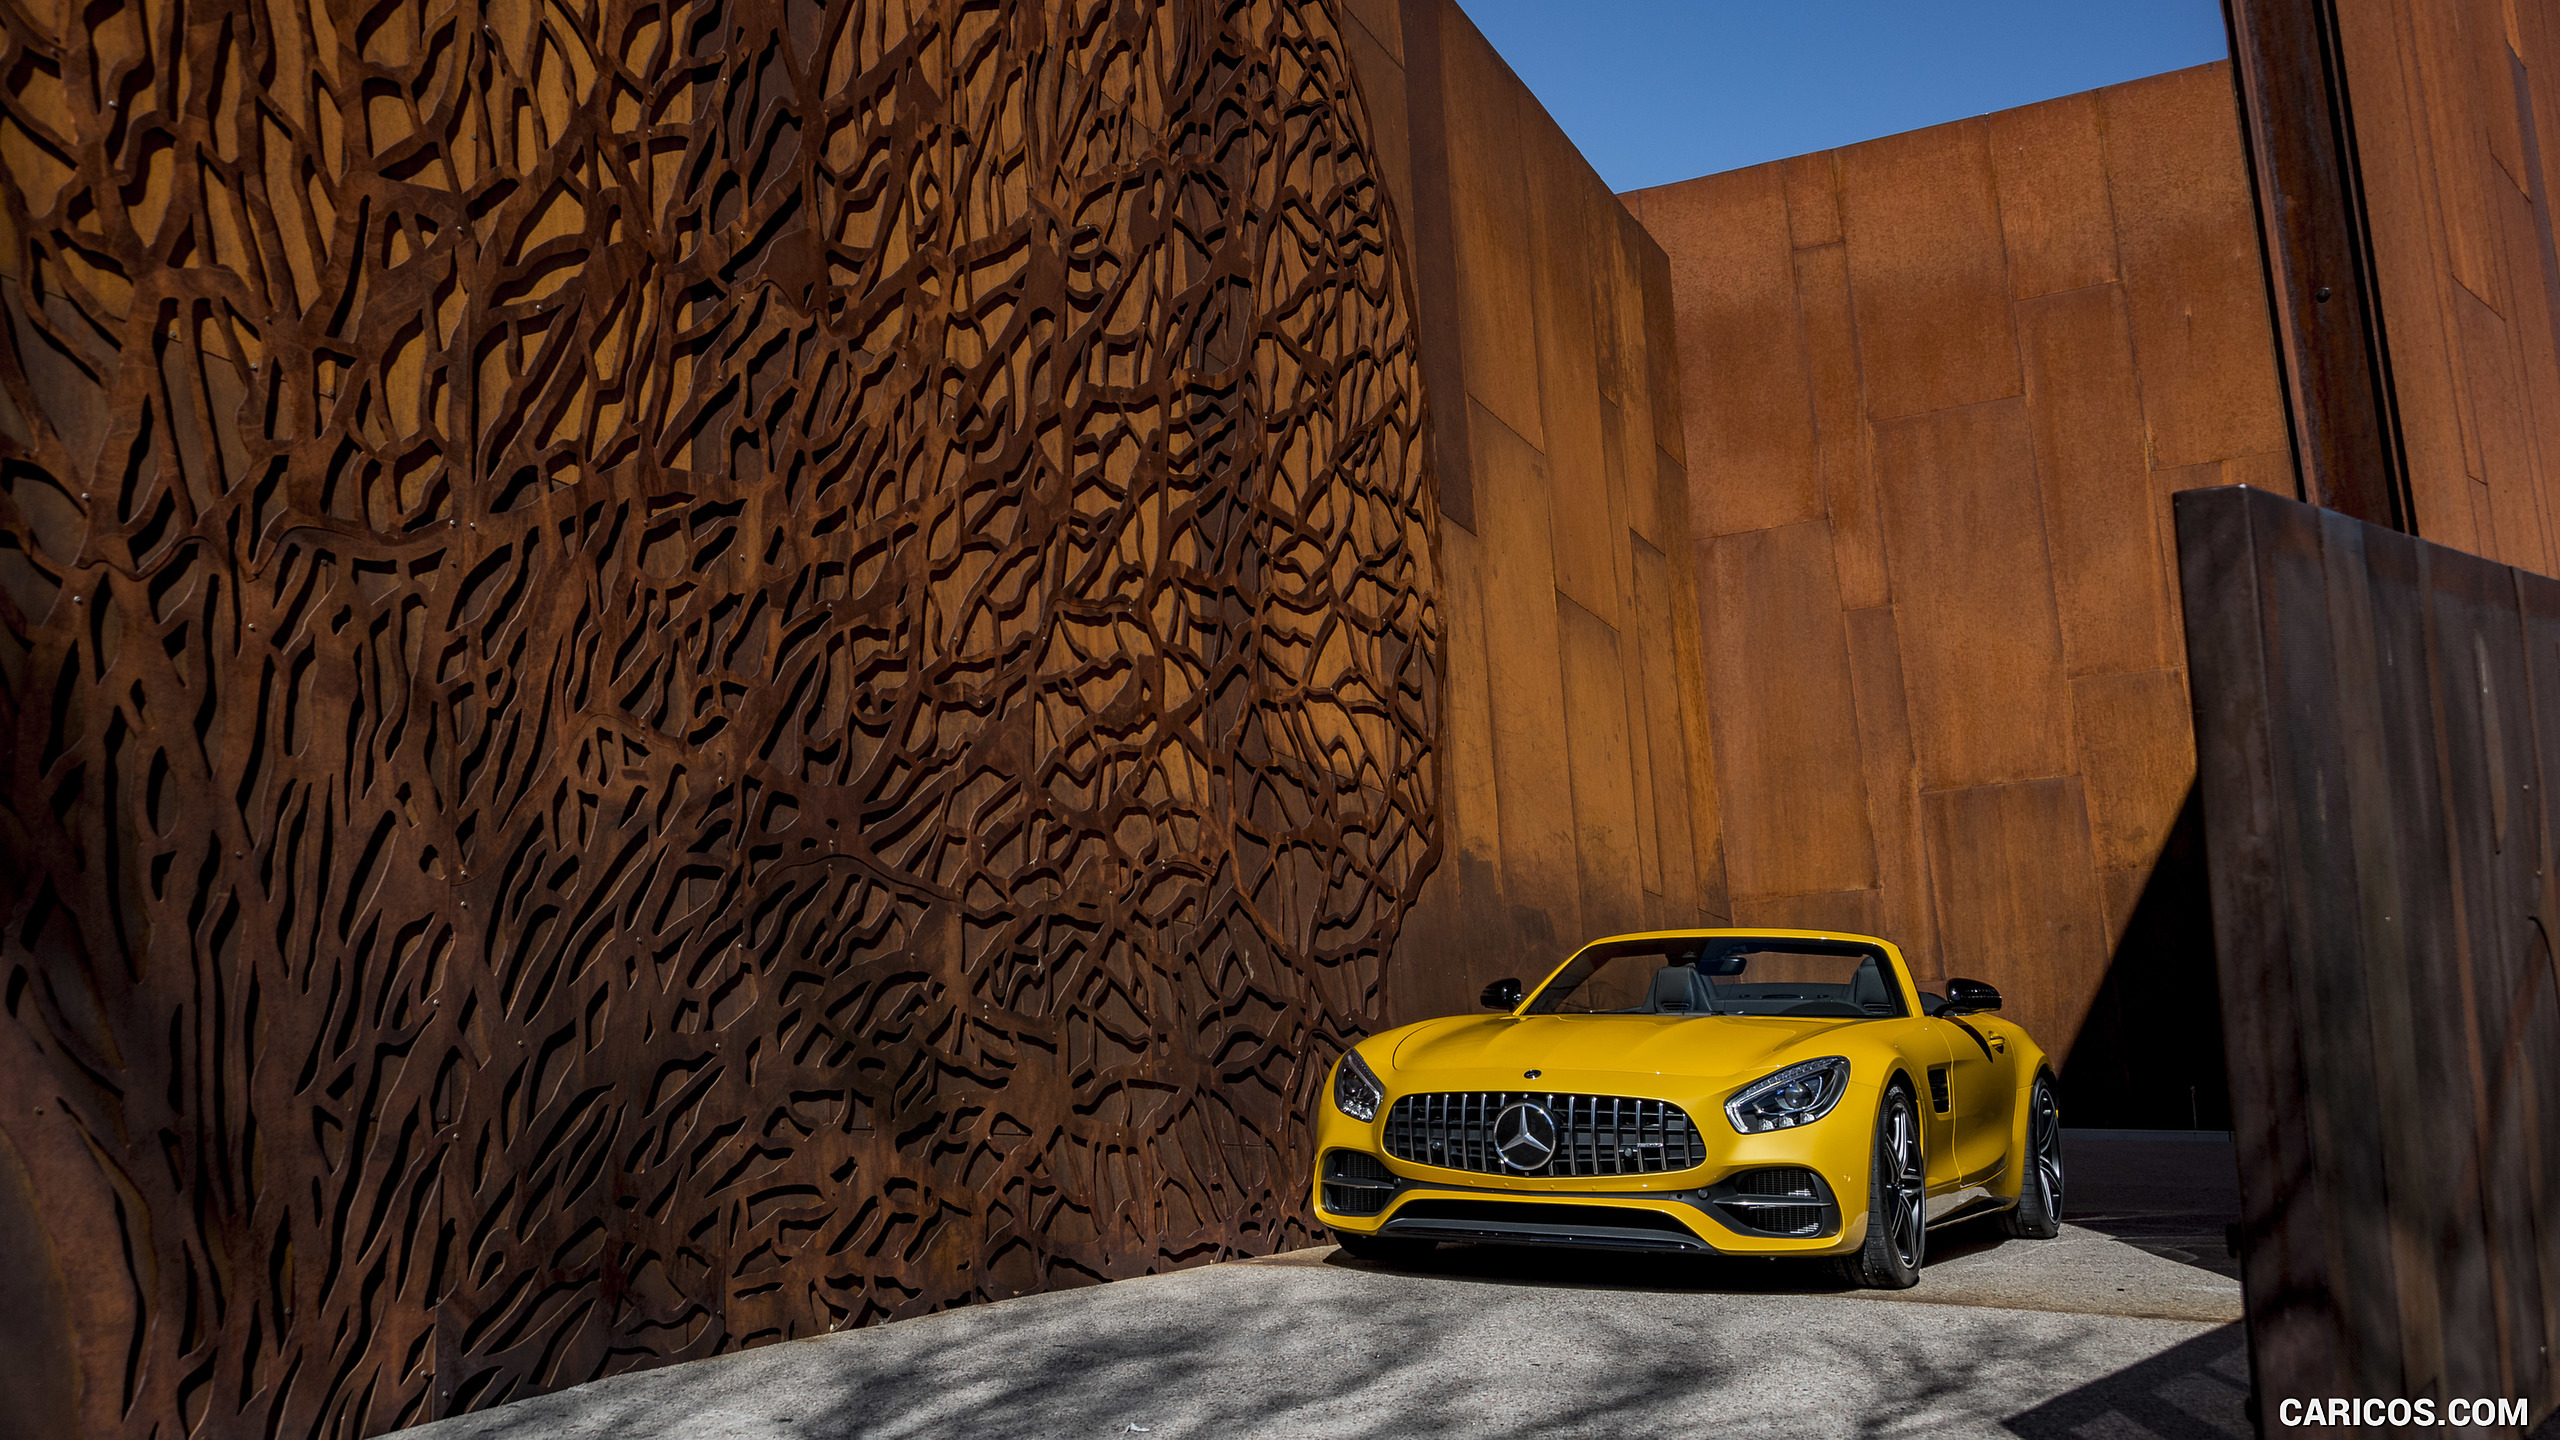 2018 Mercedes-AMG GT C Roadster - Front, #247 of 350